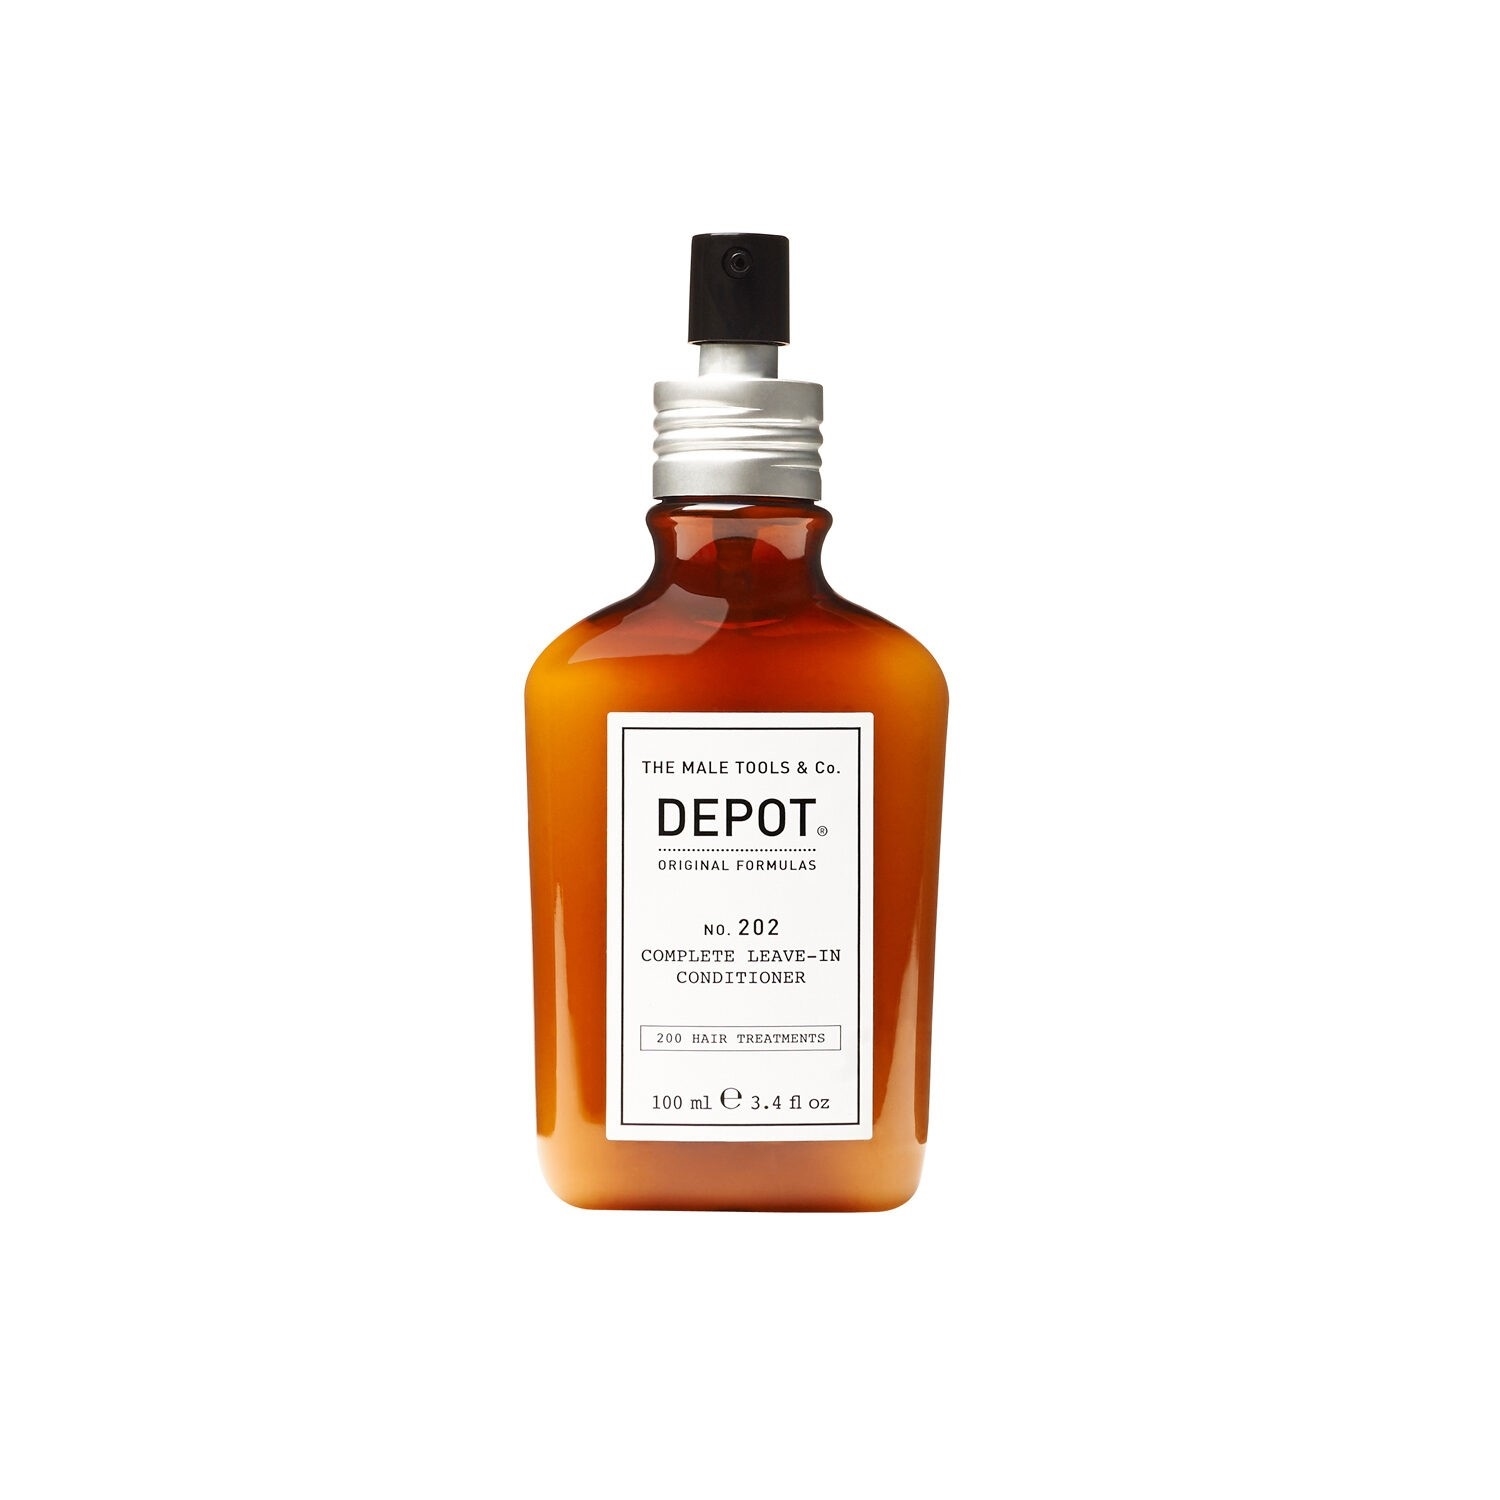 DEPOT No.202 COMPLETE LEAVE-IN CONDITIONER